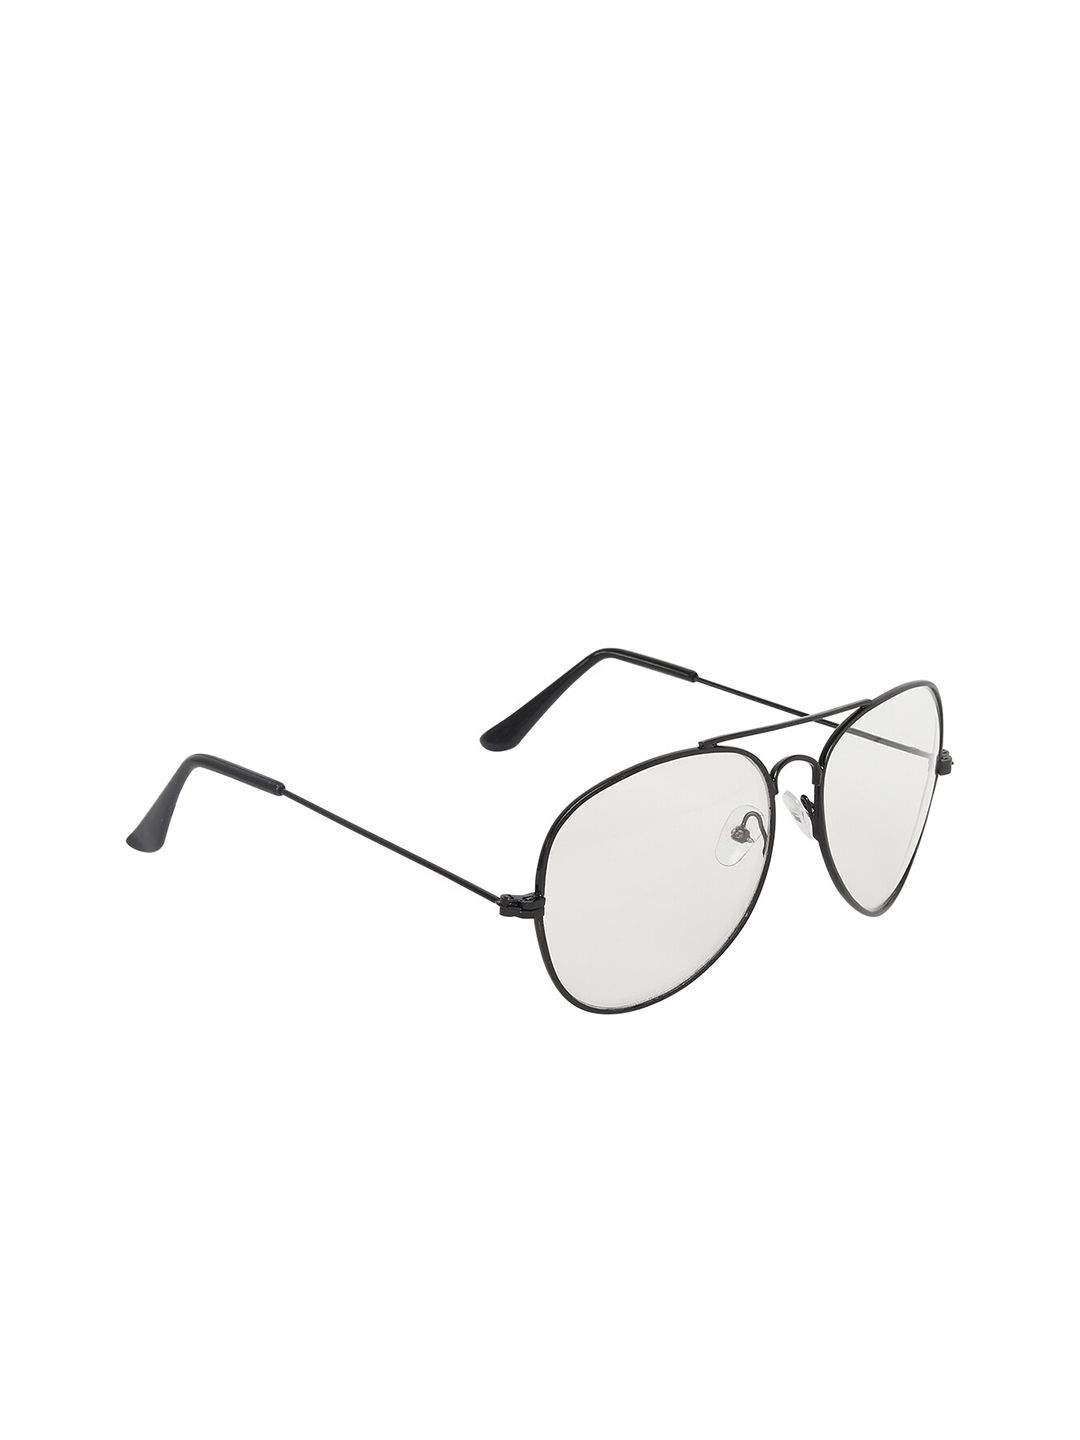 CRIBA Unisex Clear Lens & Black Aviator Sunglasses with UV Protected Lens Price in India